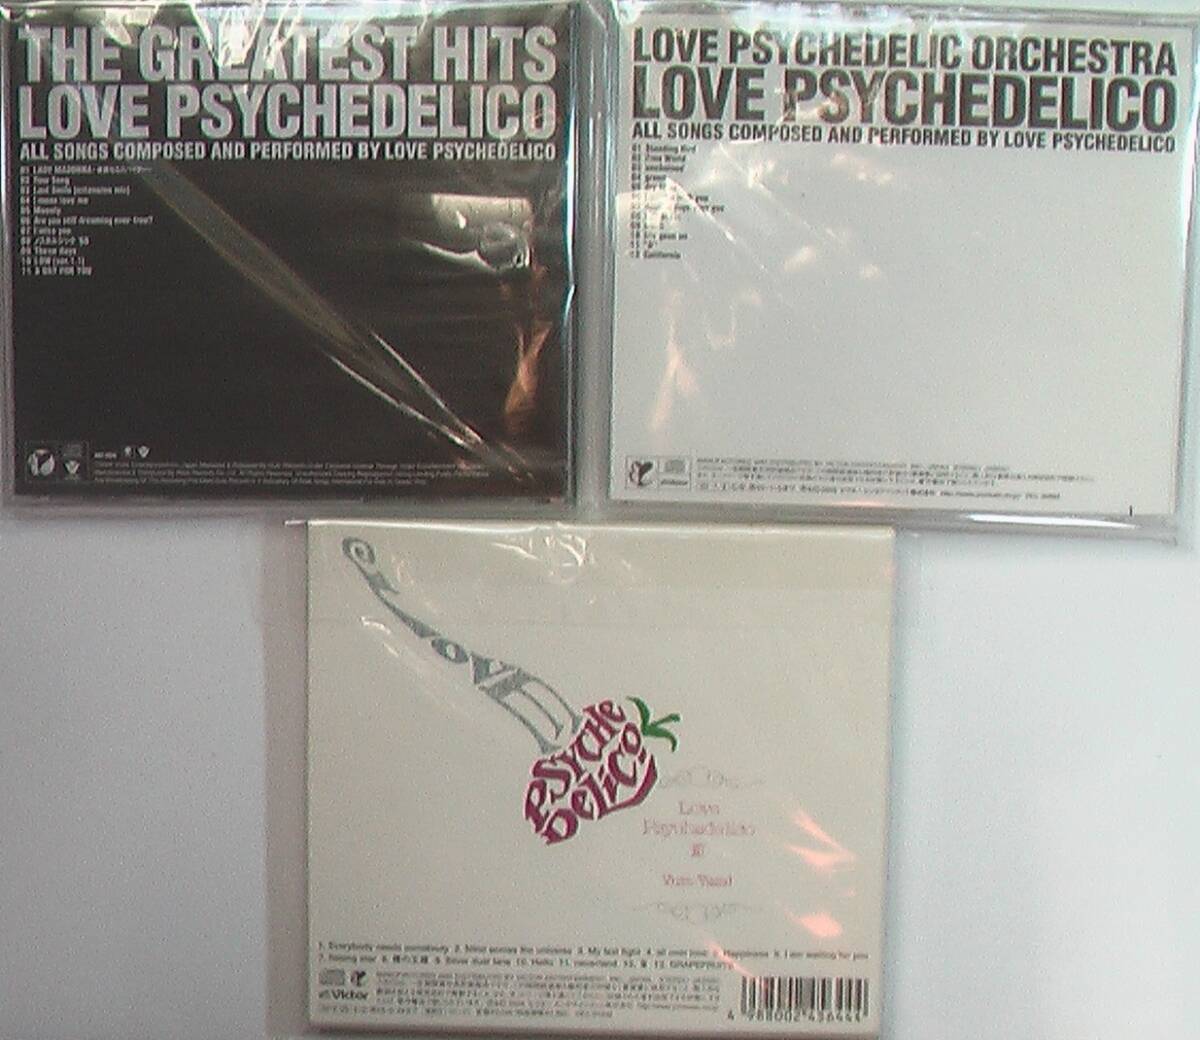 CD3枚まとめて◆ラブサイケデリコ アルバム セット★送料185円！The Greatest Hits＋LOVE PSYCHEDELIC ORCHESTRA＋LOVE PSYCHEDELICO IIIの画像2